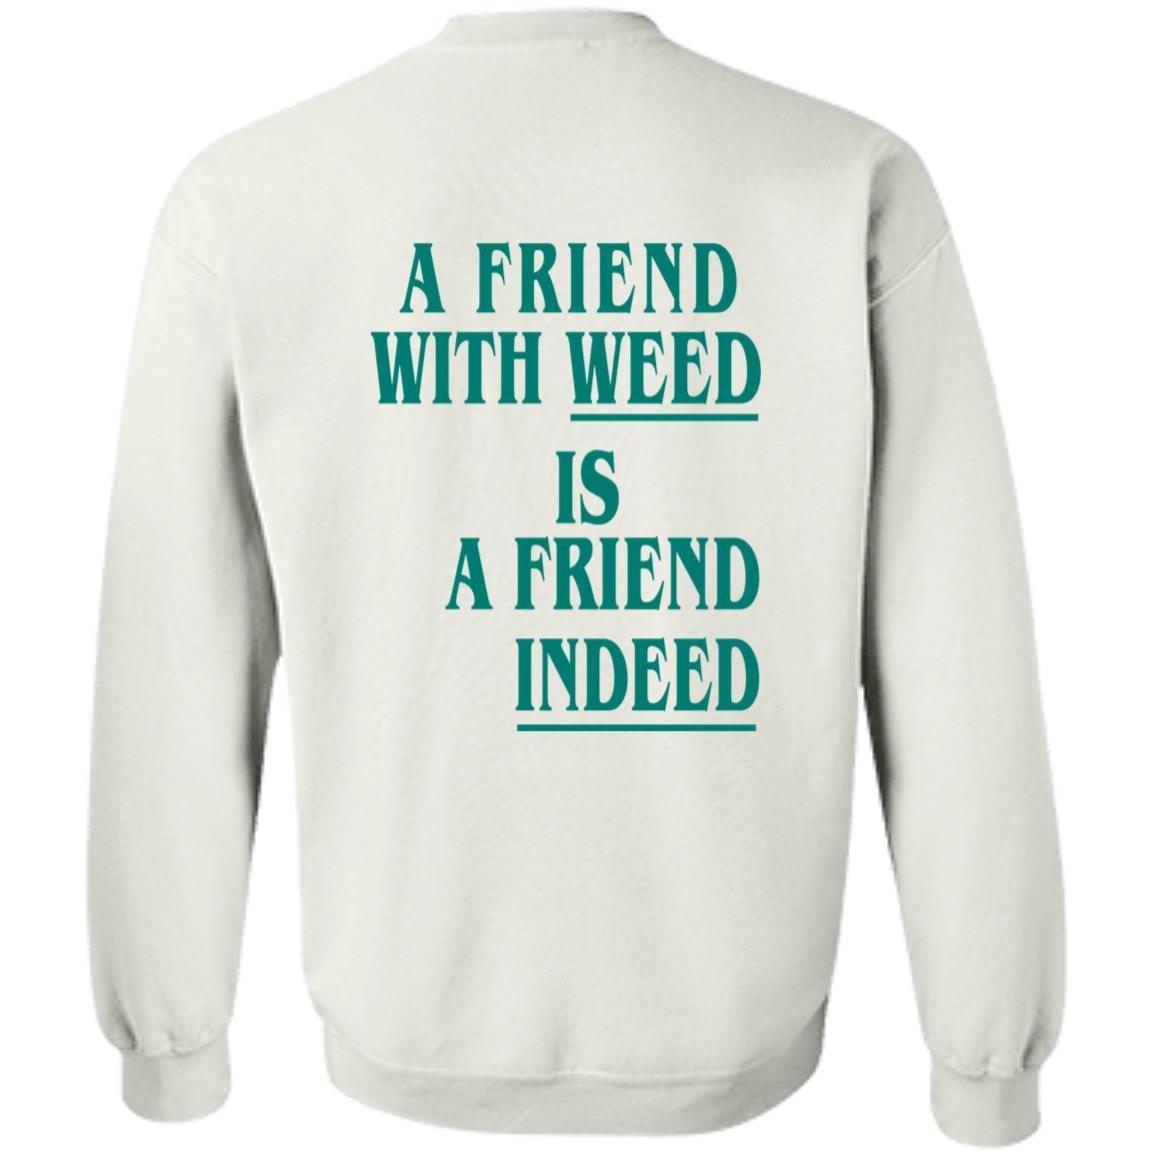 A Friend With Weed Is A Friend Indeed shirt